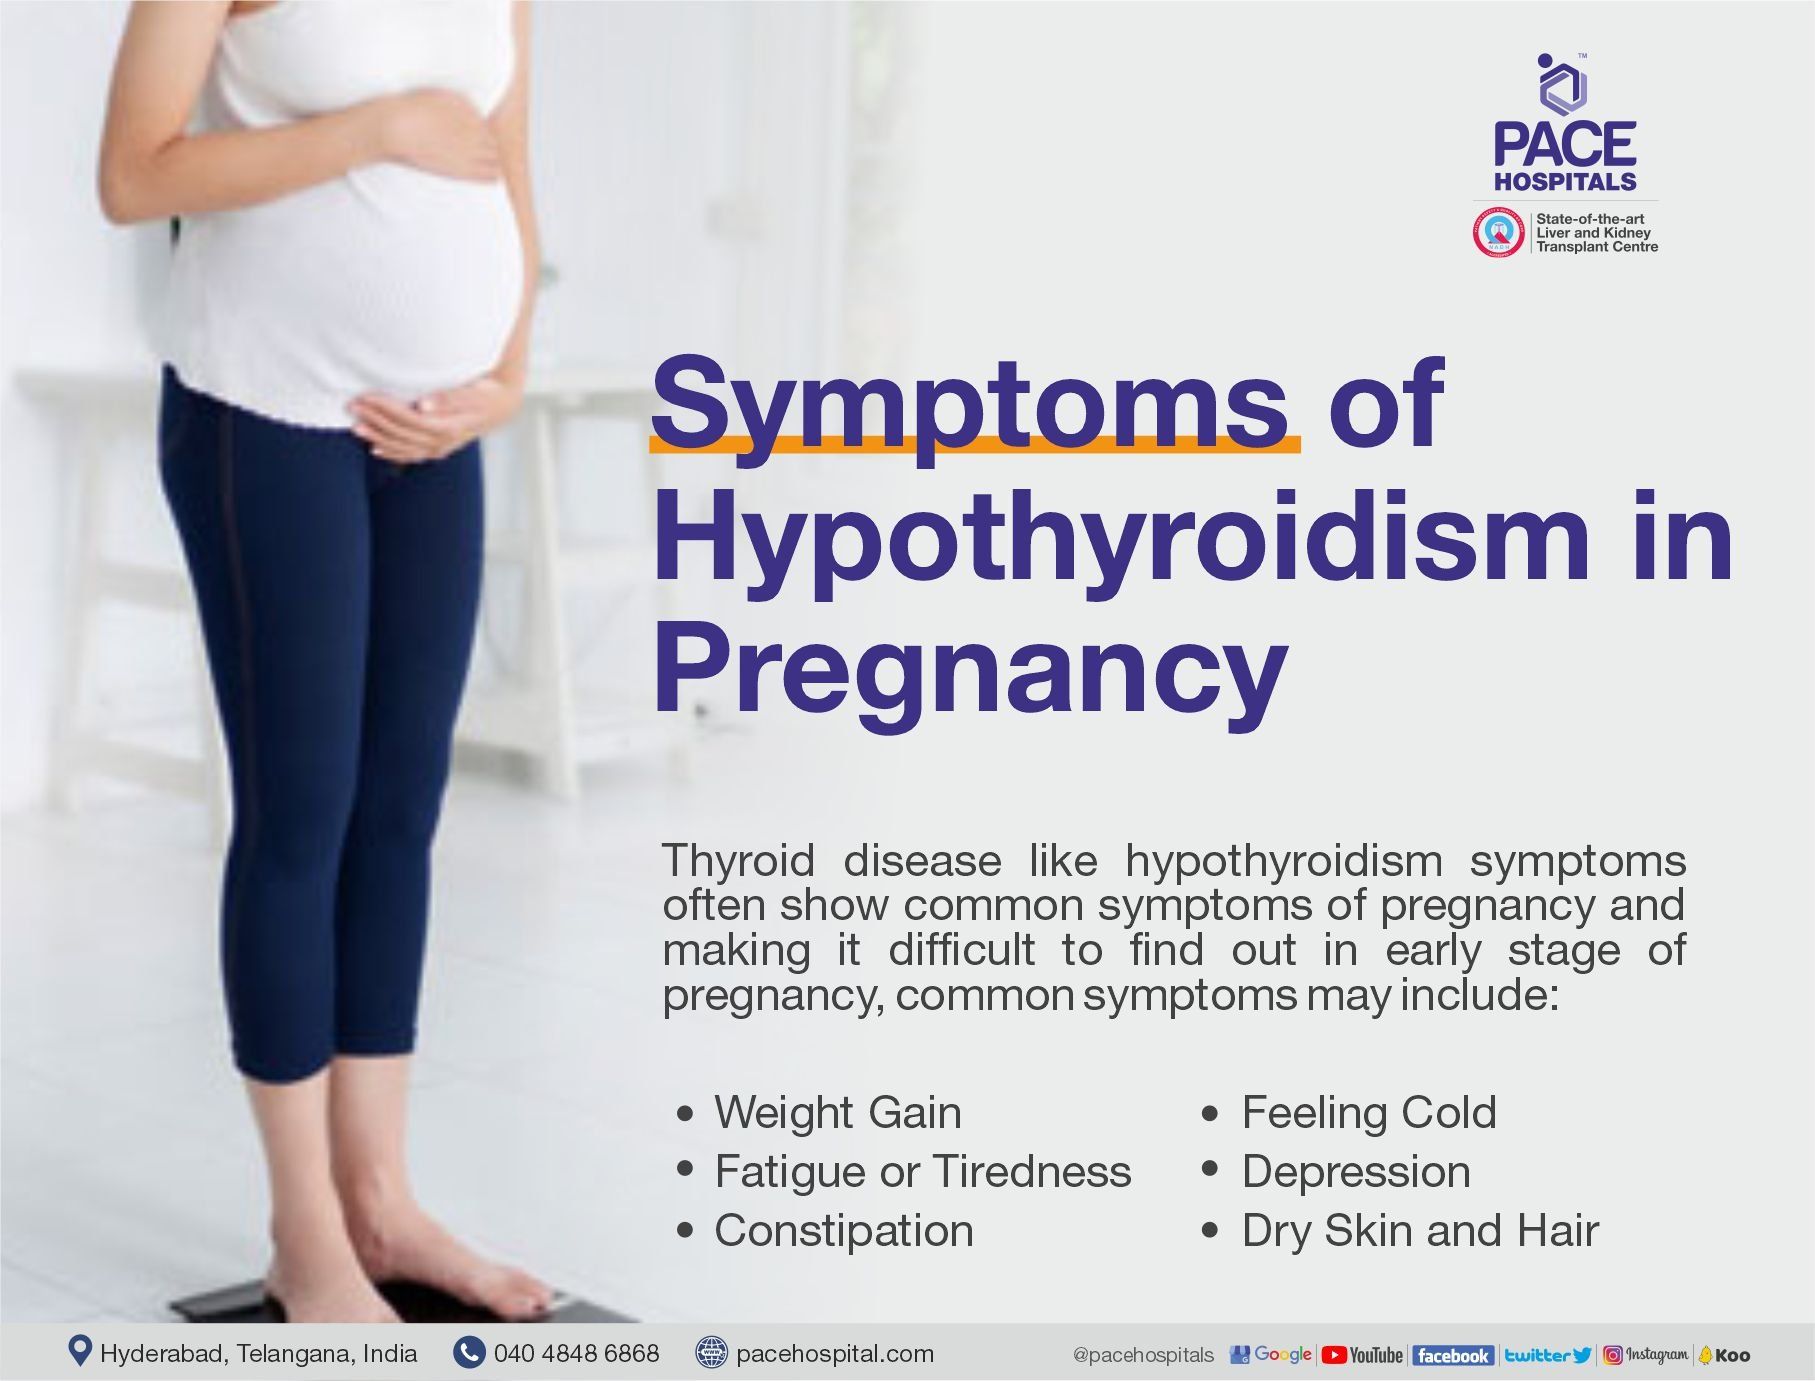 Symptoms of hypothyroidism in pregnancy | Pace Hospitals